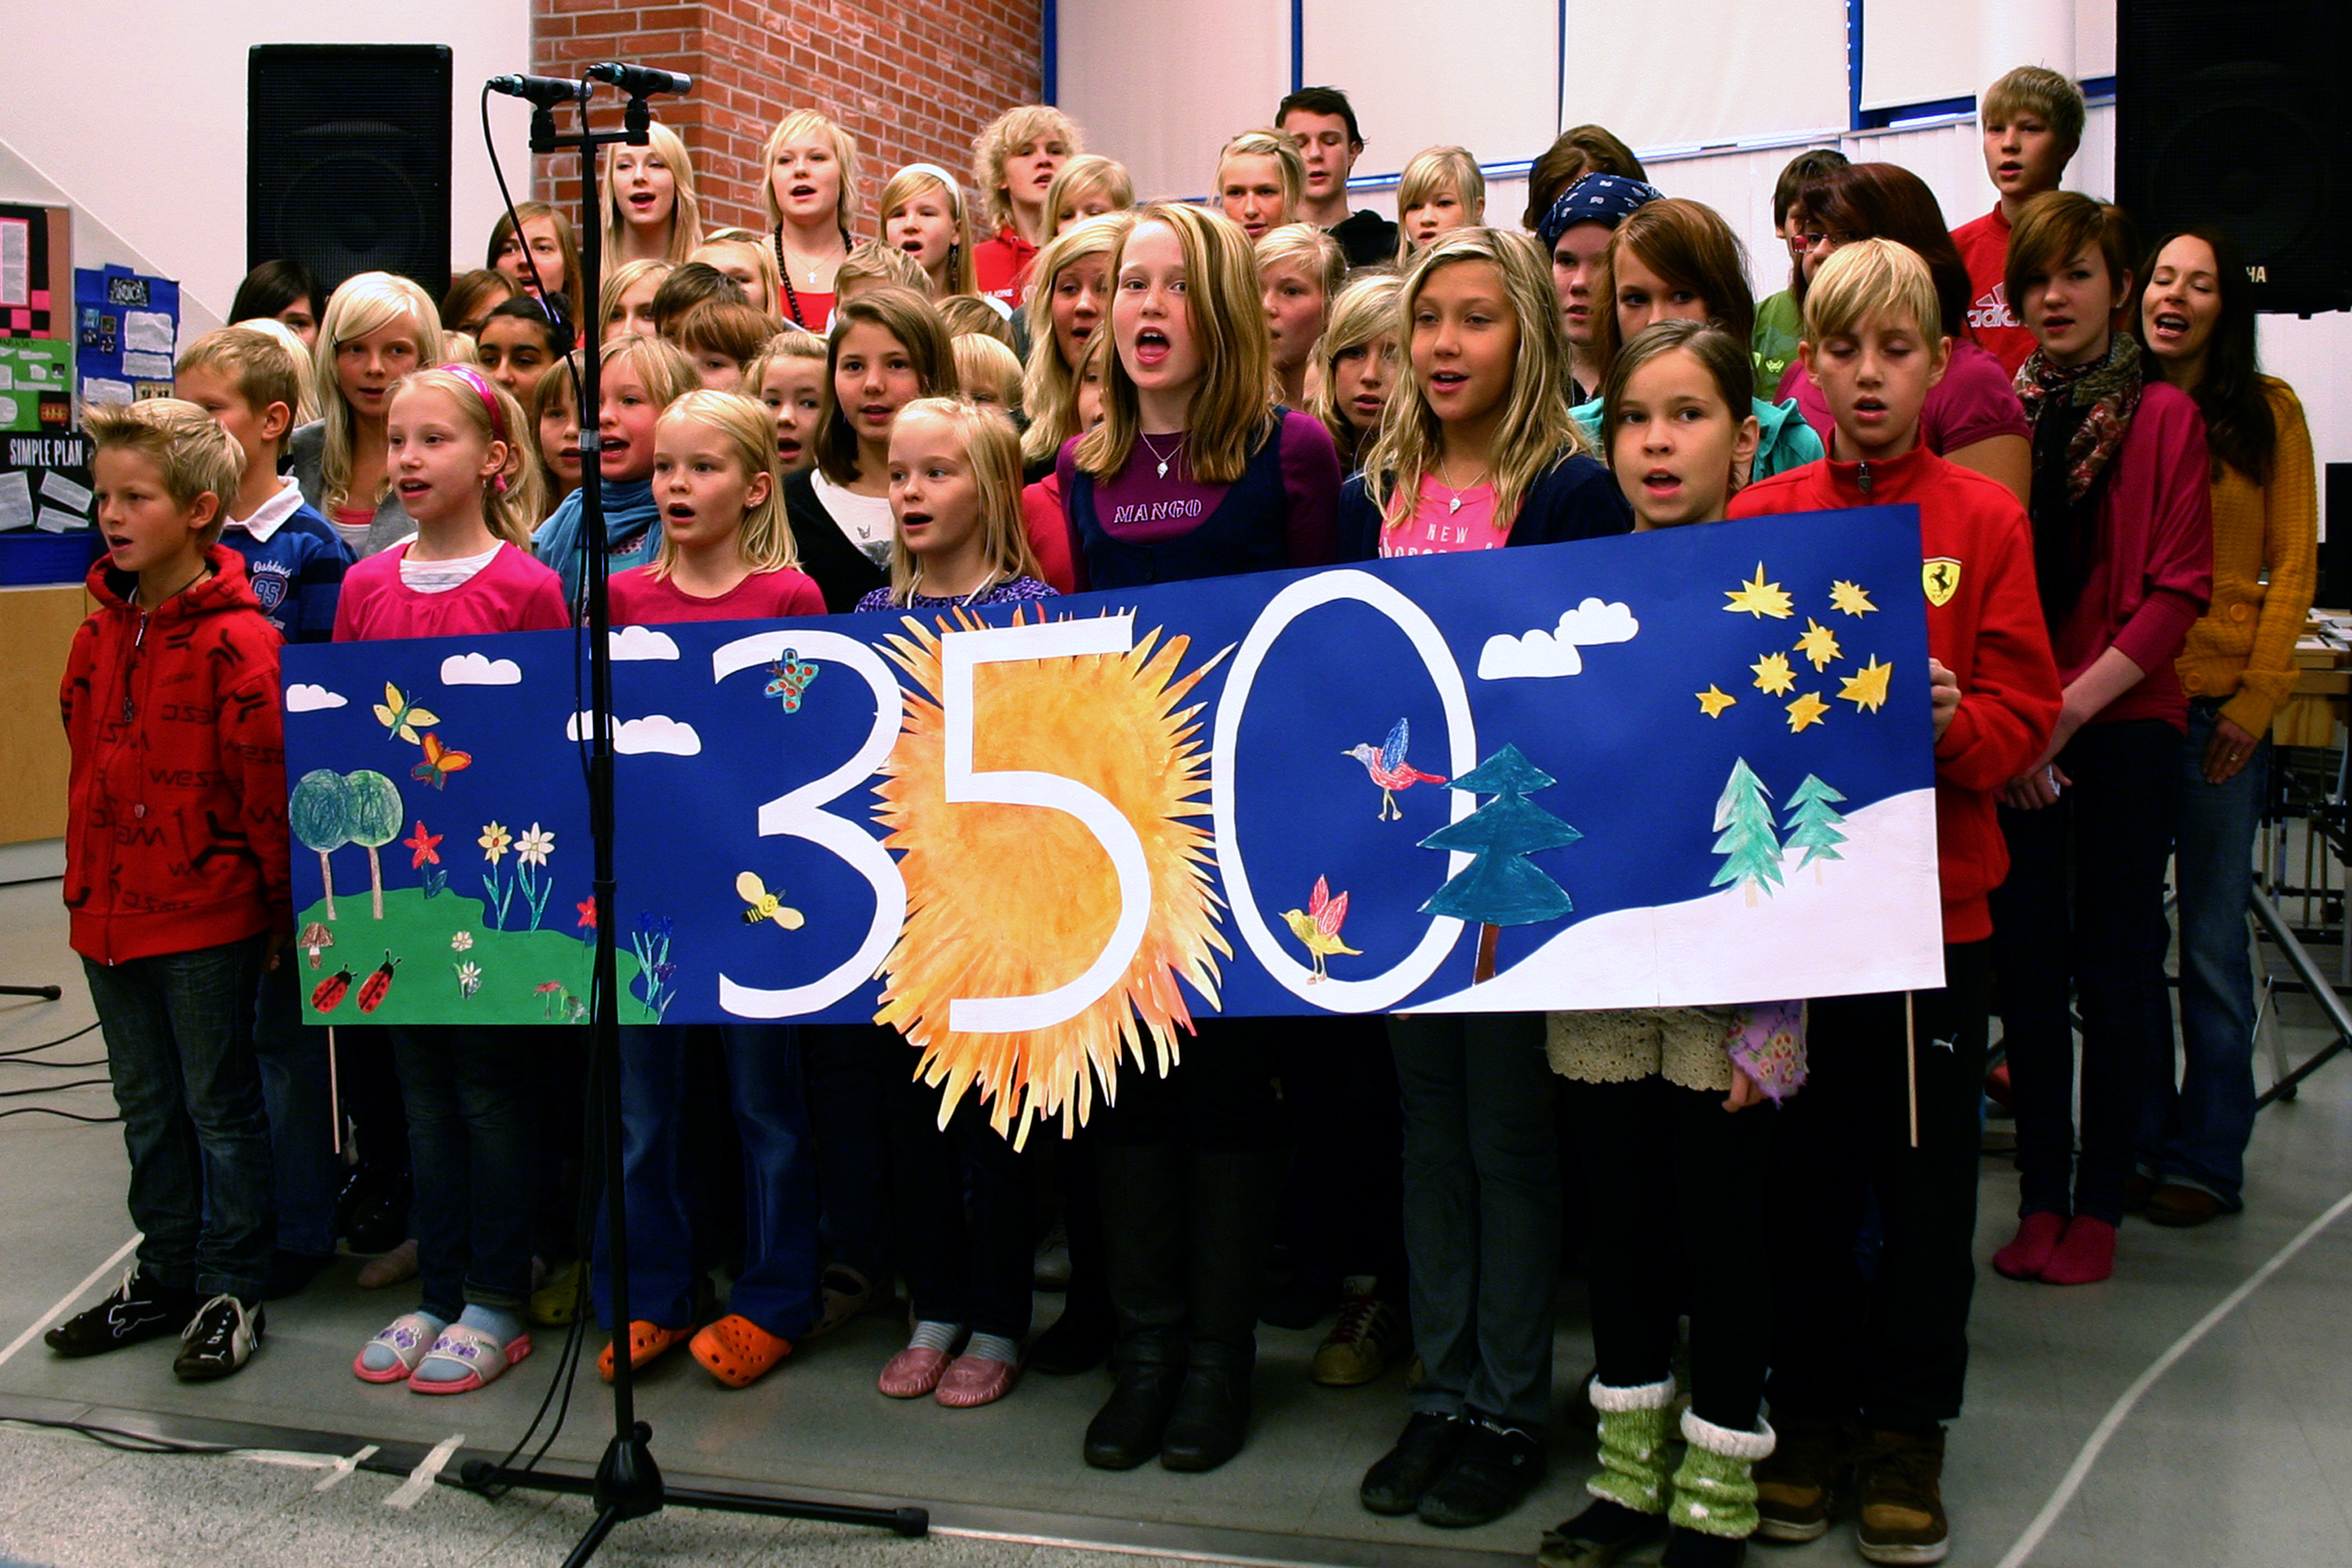 Children in a Finnish school choir perform a song called "The Time Is Now" on their Climate Action Day. Photo by Aapo-Lassi Kankaala/Flickr. https://www.flickr.com/photos/350org/4040191008